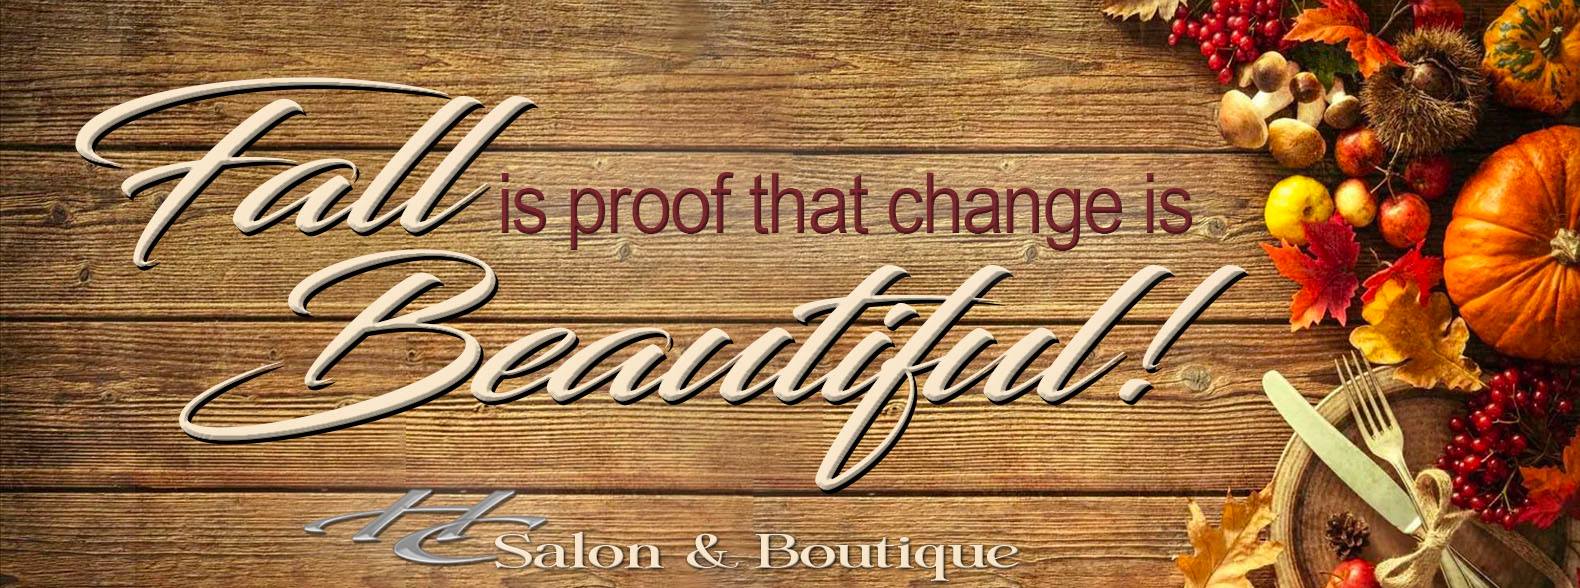 The Hair Company of Charlotte Hall 30320 Triangle Dr, Charlotte Hall Maryland 20622